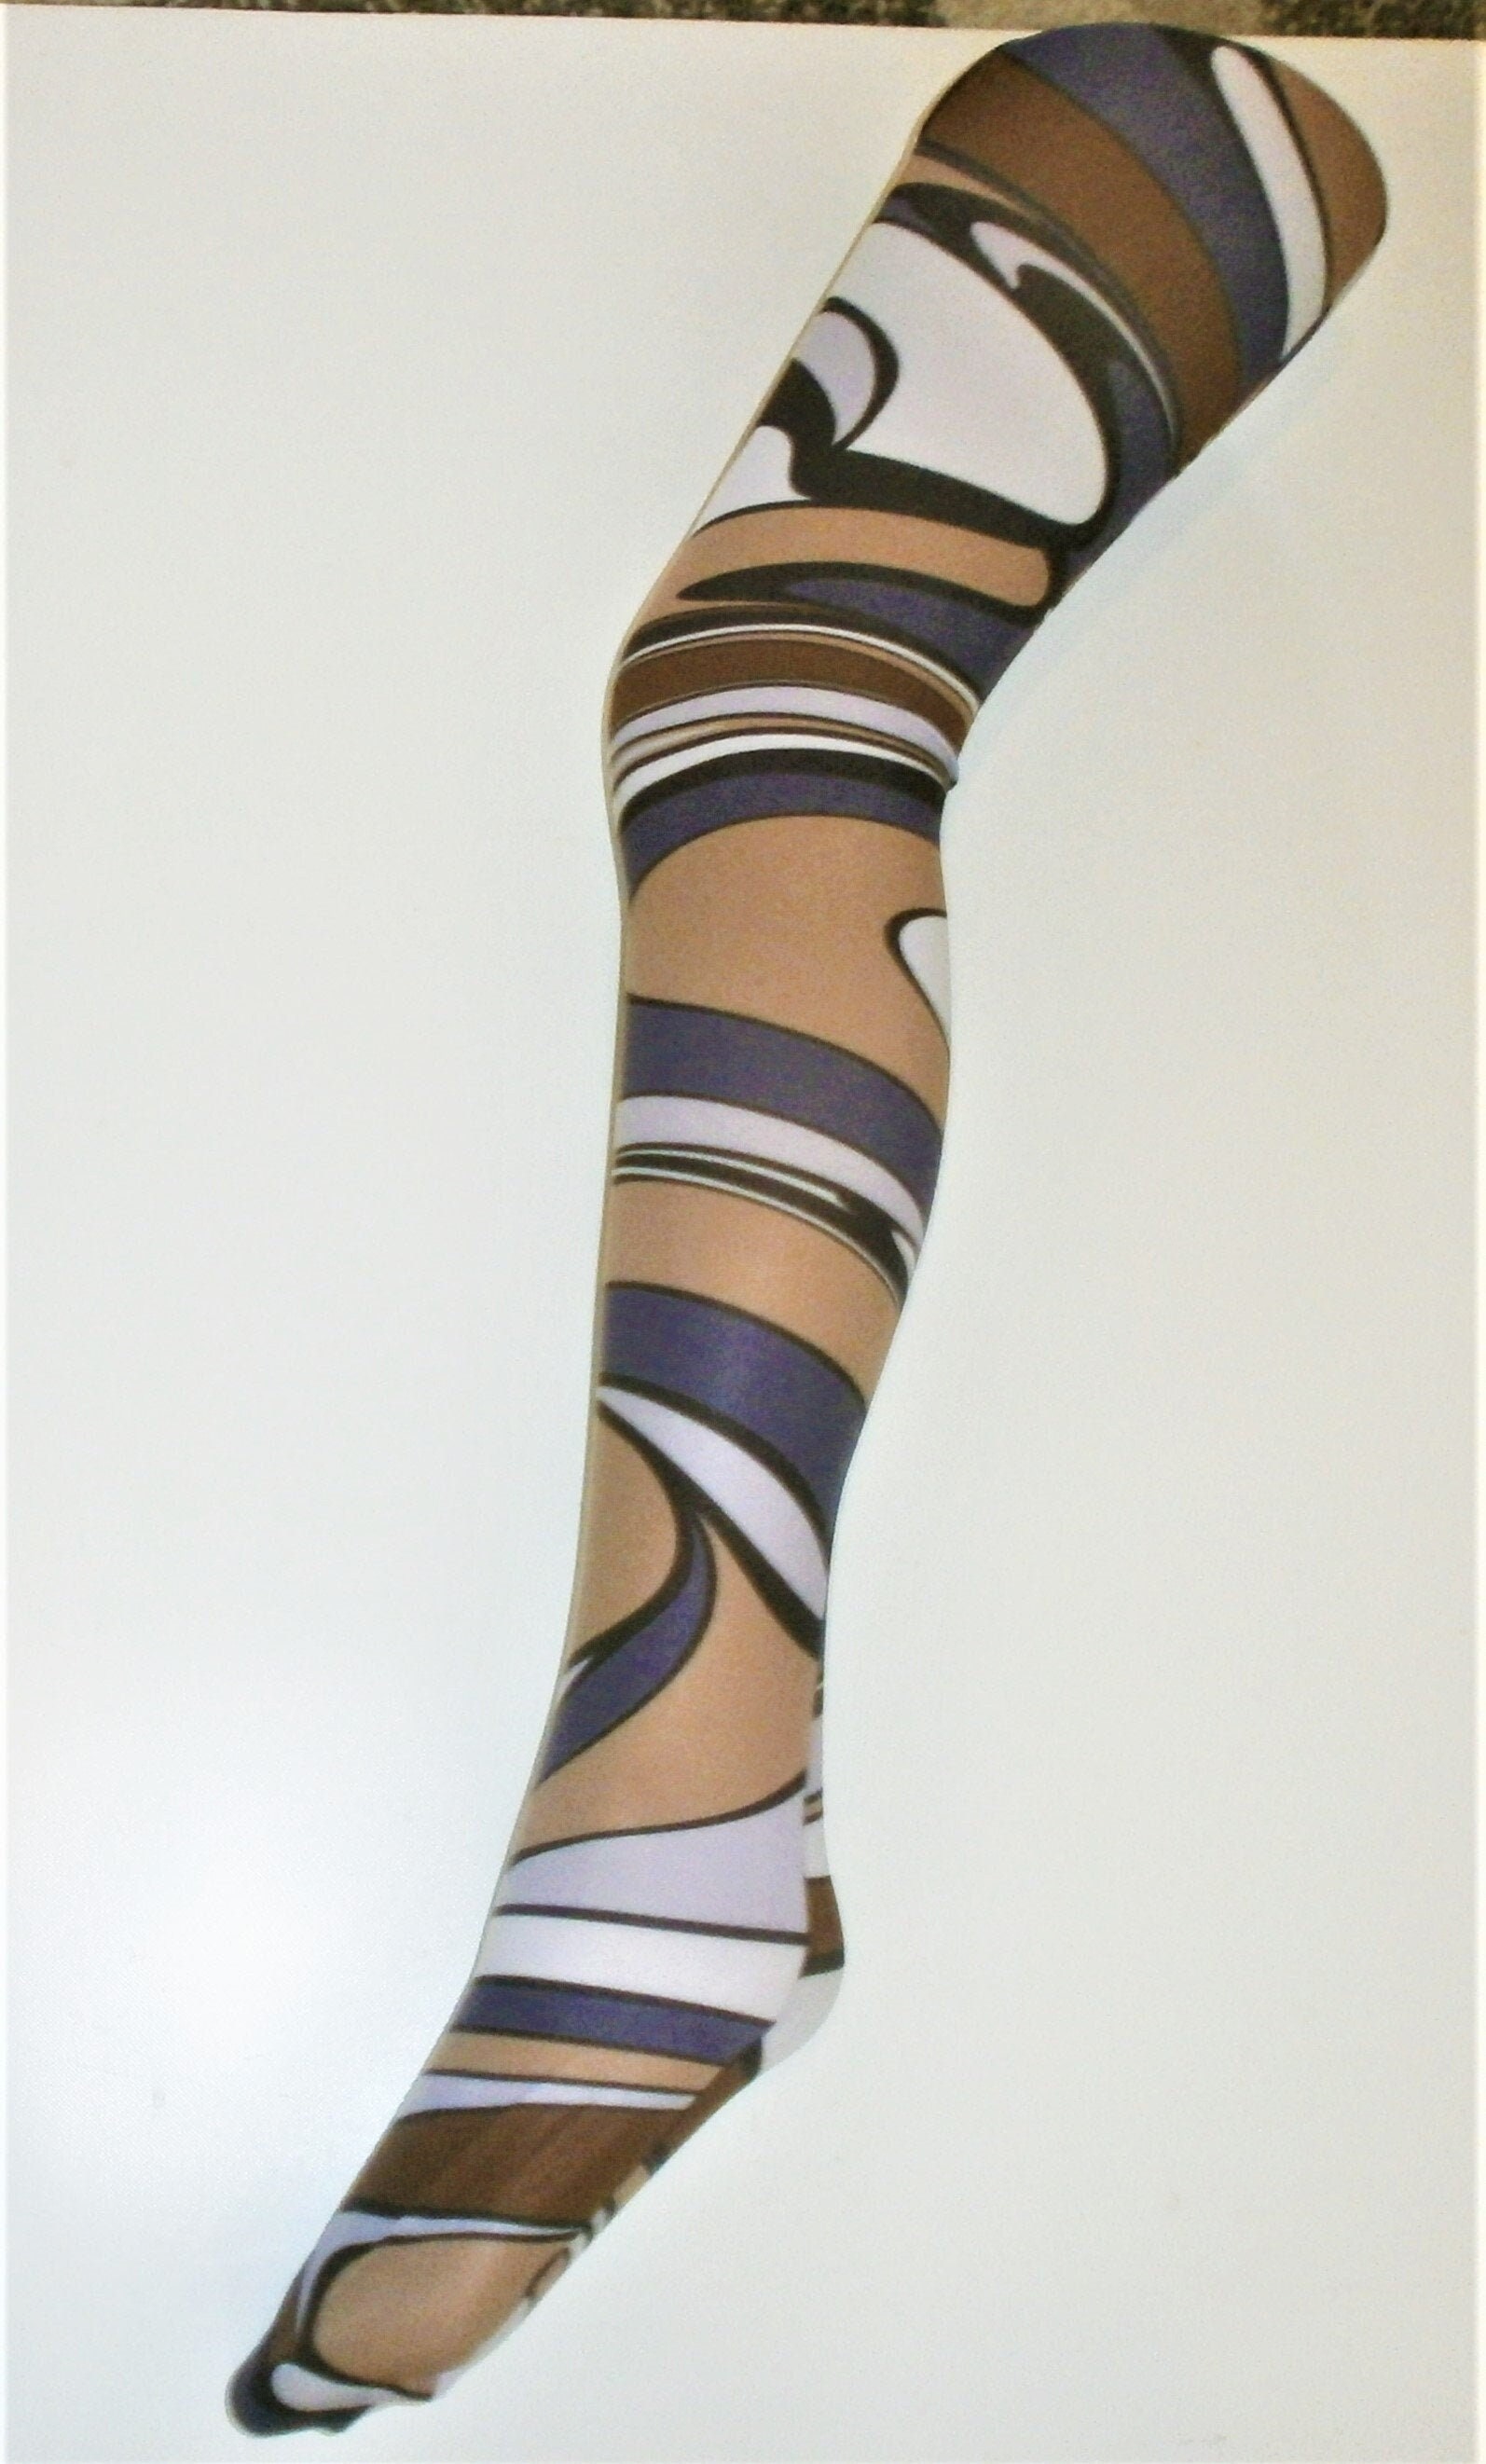 Carnaby Psychedelic Pattern Tights - ladies vintage retro 60s - 70s style